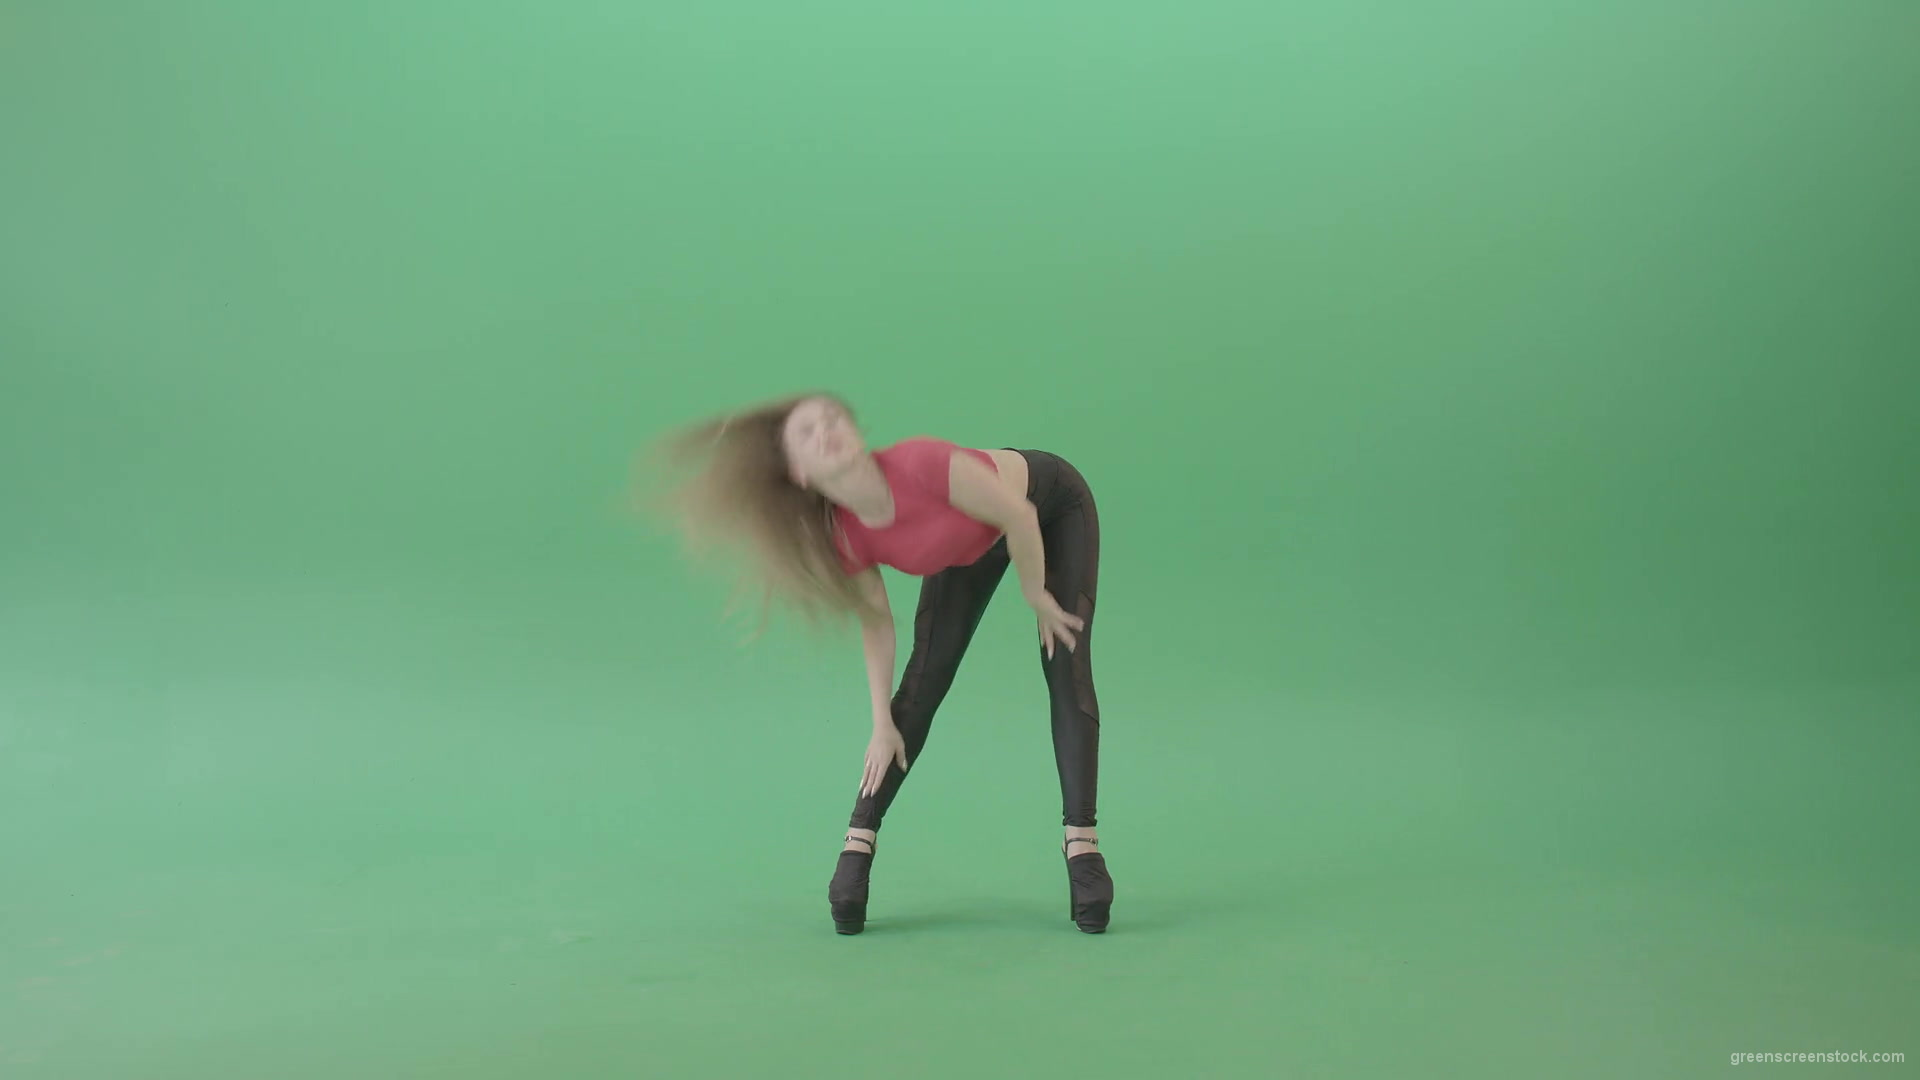 Body-wave-by-strip-dance-girl-on-green-screen-chromakey-4K-Video-Footage-1920_007 Green Screen Stock